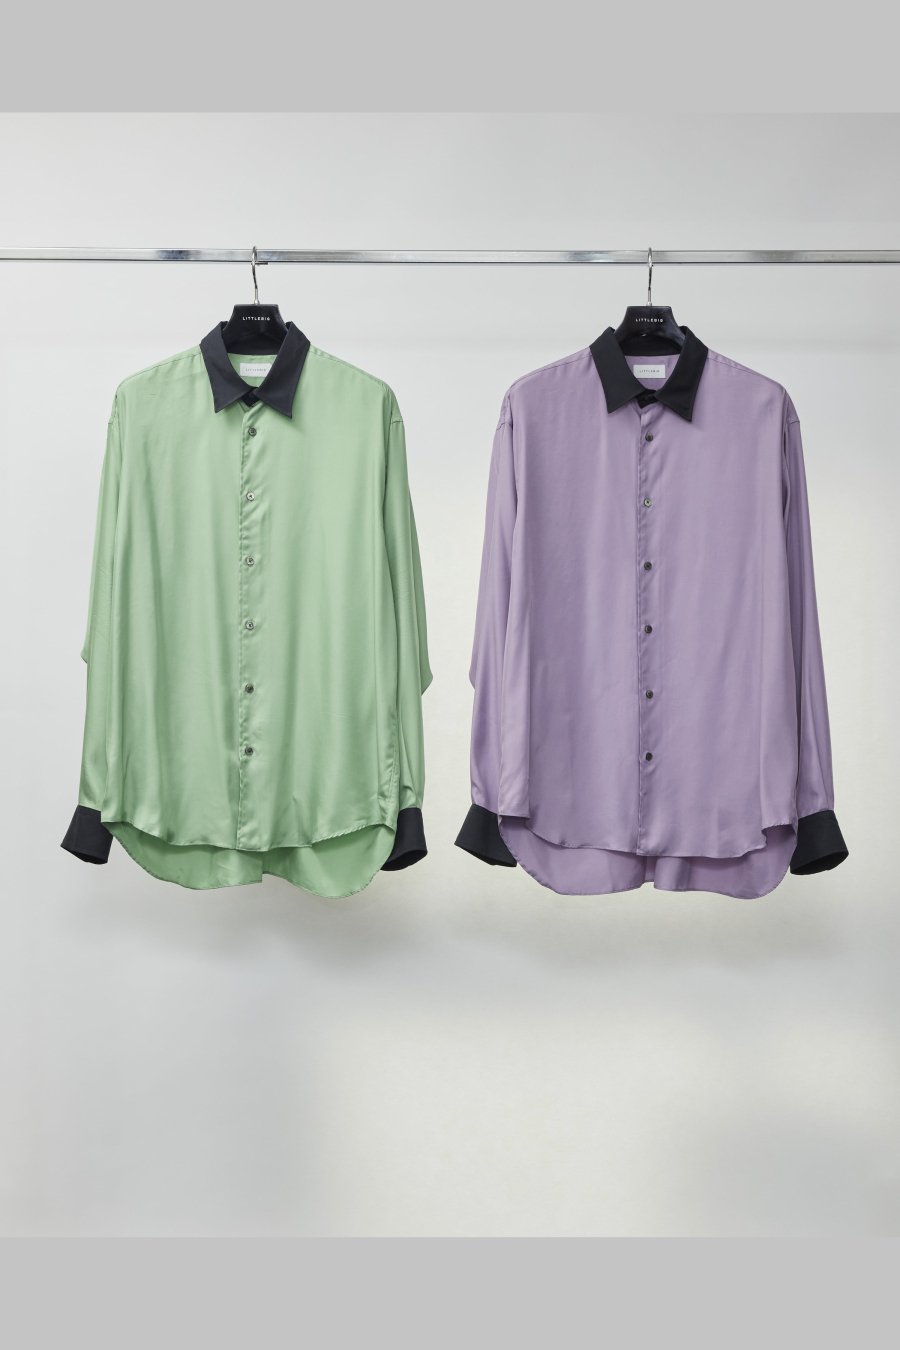 LITTLEBIG  Cupro Cleric SH（Green or Purple）<img class='new_mark_img2' src='https://img.shop-pro.jp/img/new/icons15.gif' style='border:none;display:inline;margin:0px;padding:0px;width:auto;' />